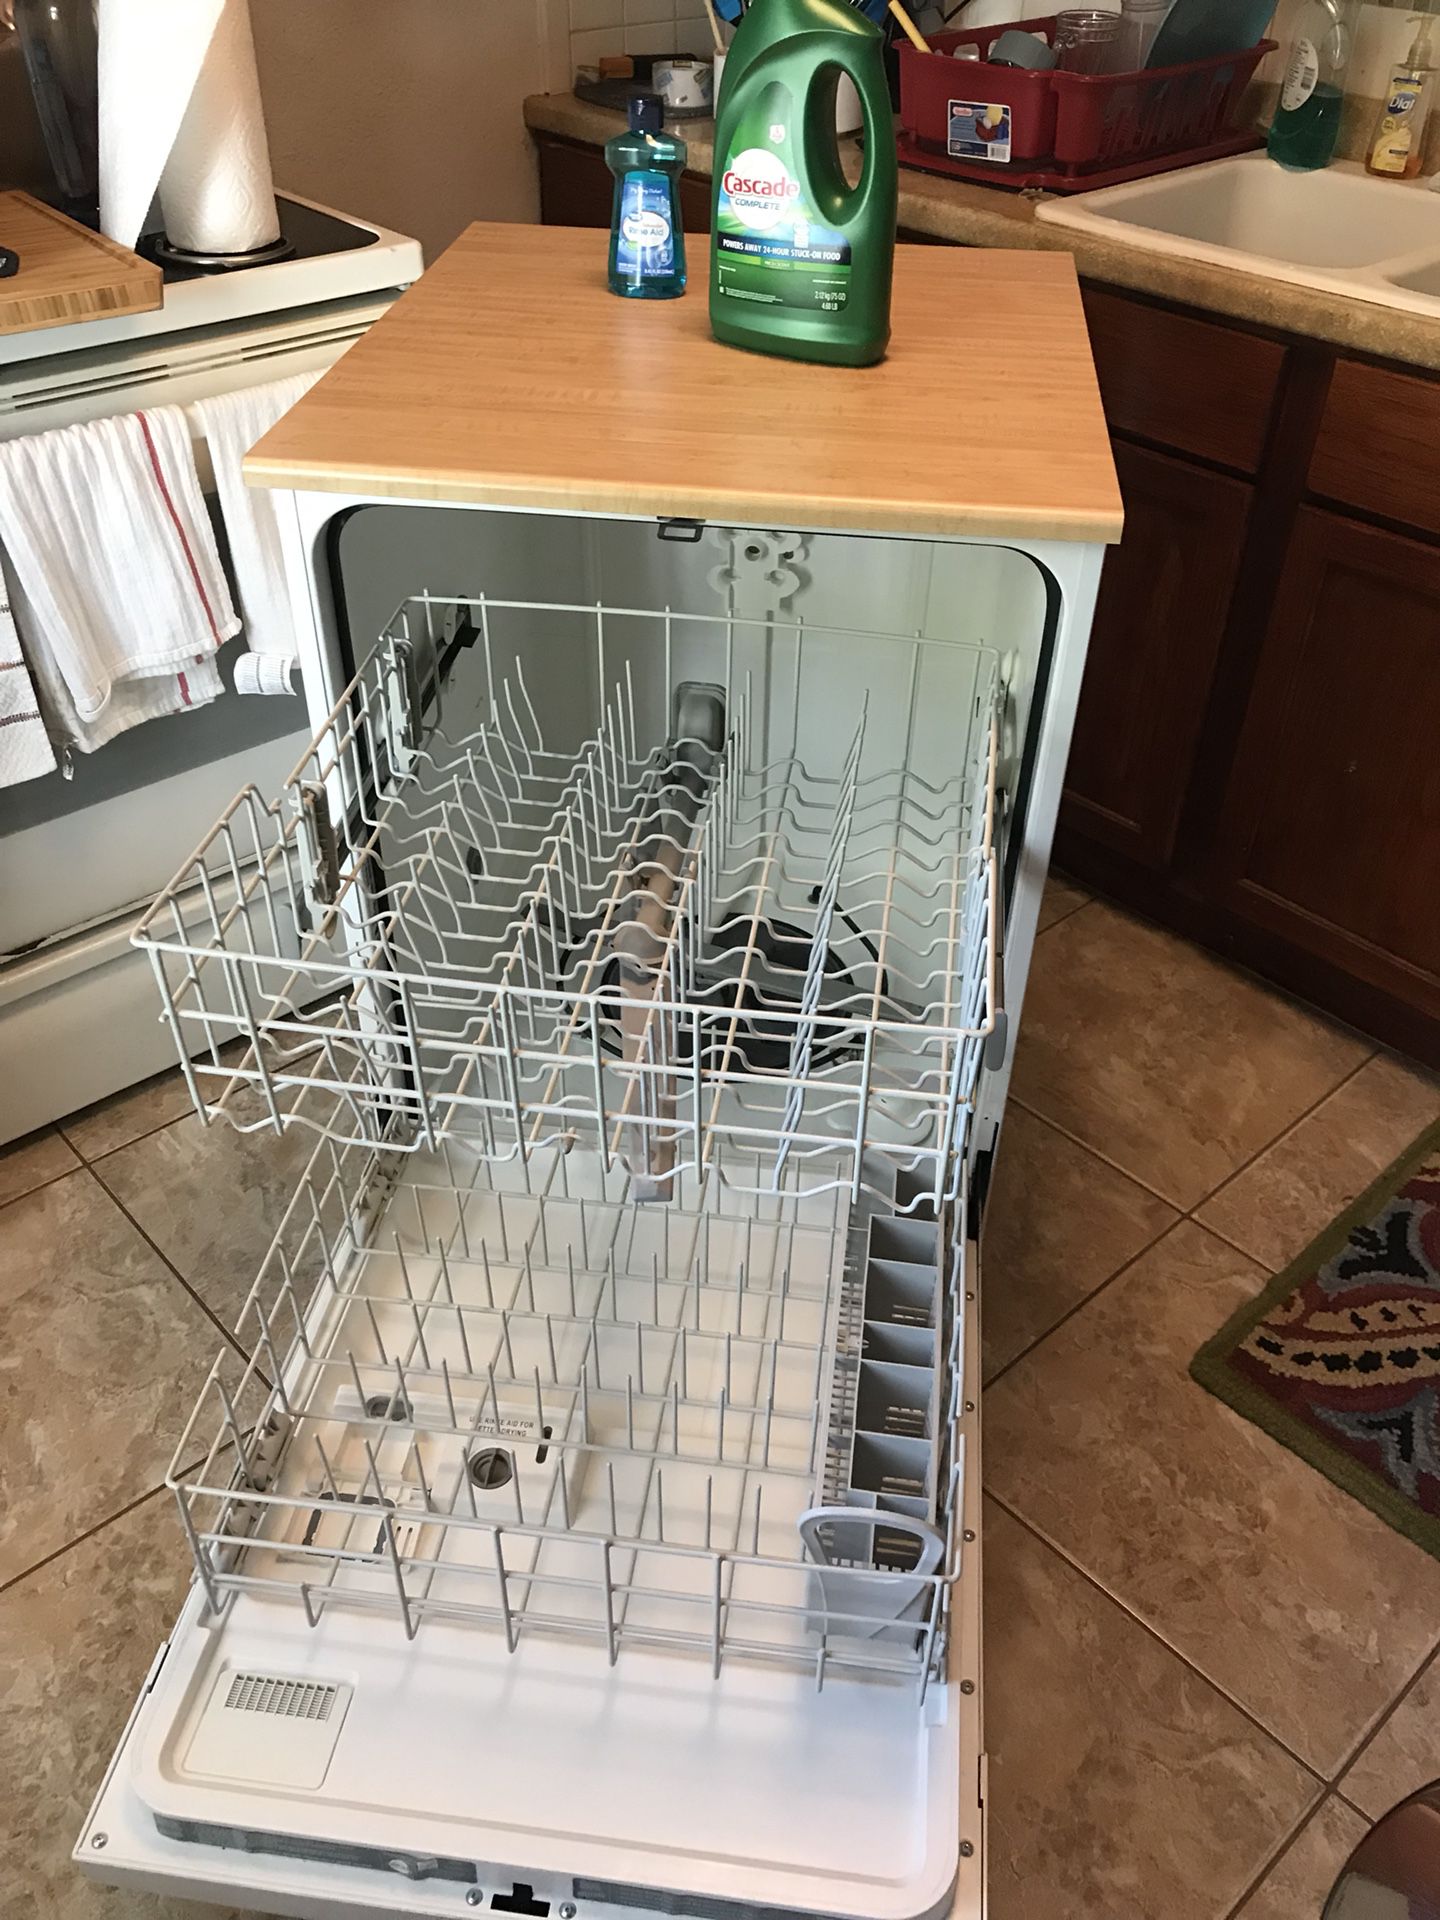 ecozy Portable Countertop Dishwasher - No Hookup Needed for Sale in Odessa,  FL - OfferUp